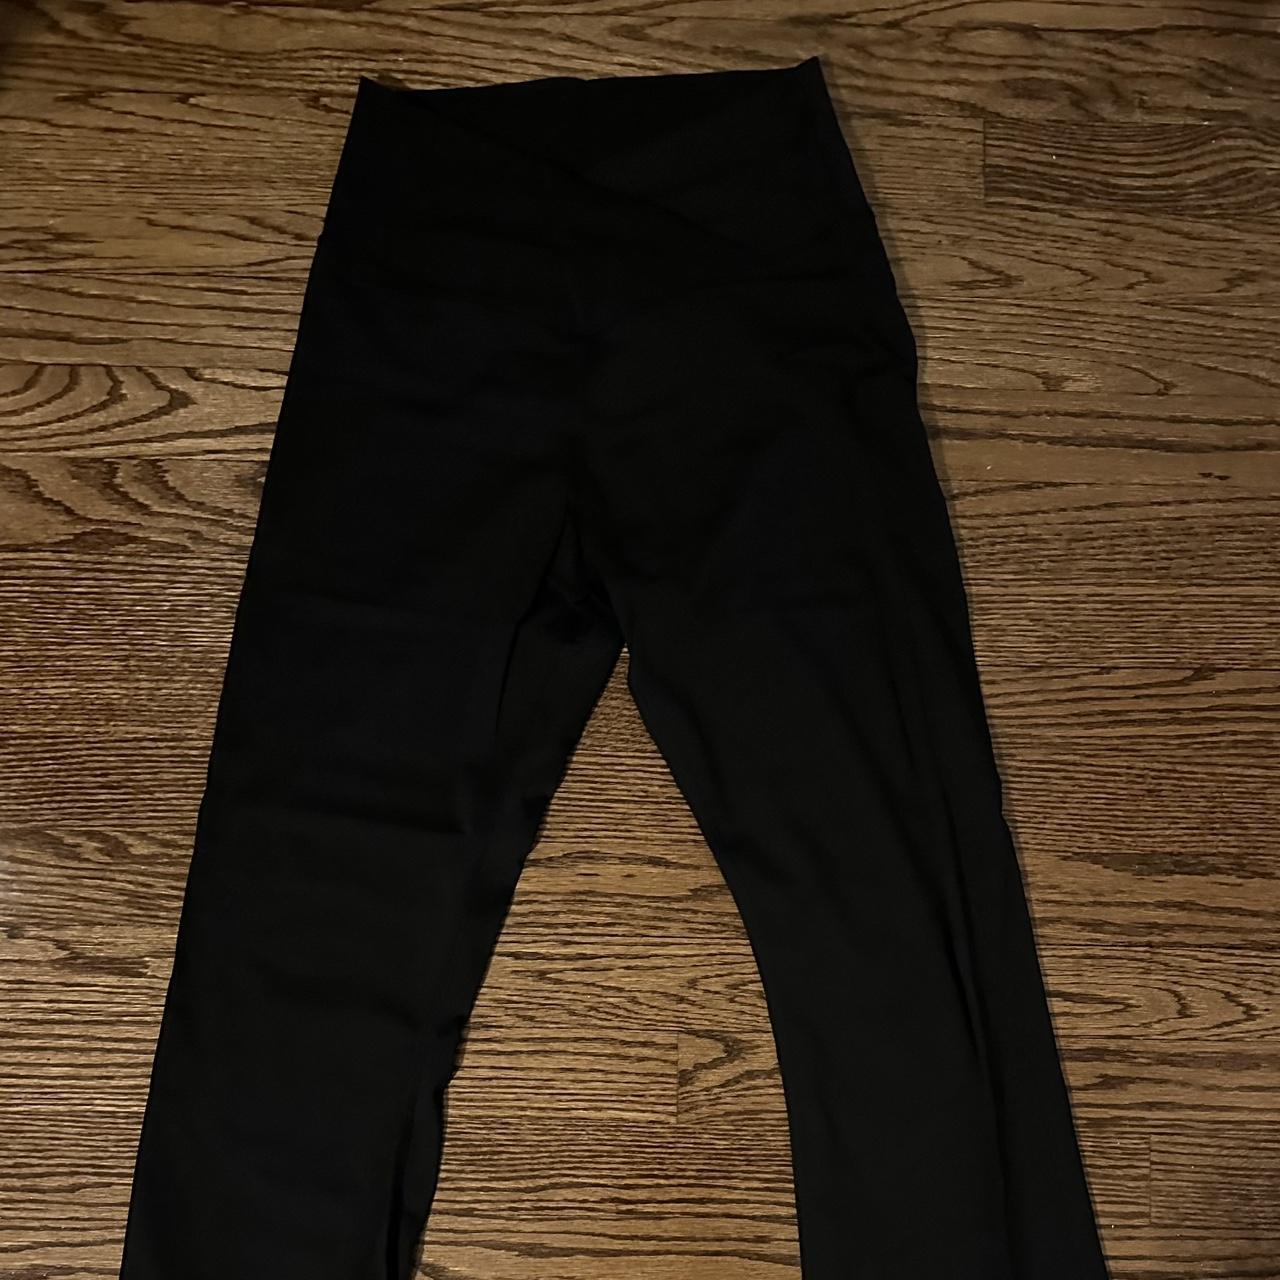 Black Crossover Flare Leggings from Amazon Remind... - Depop